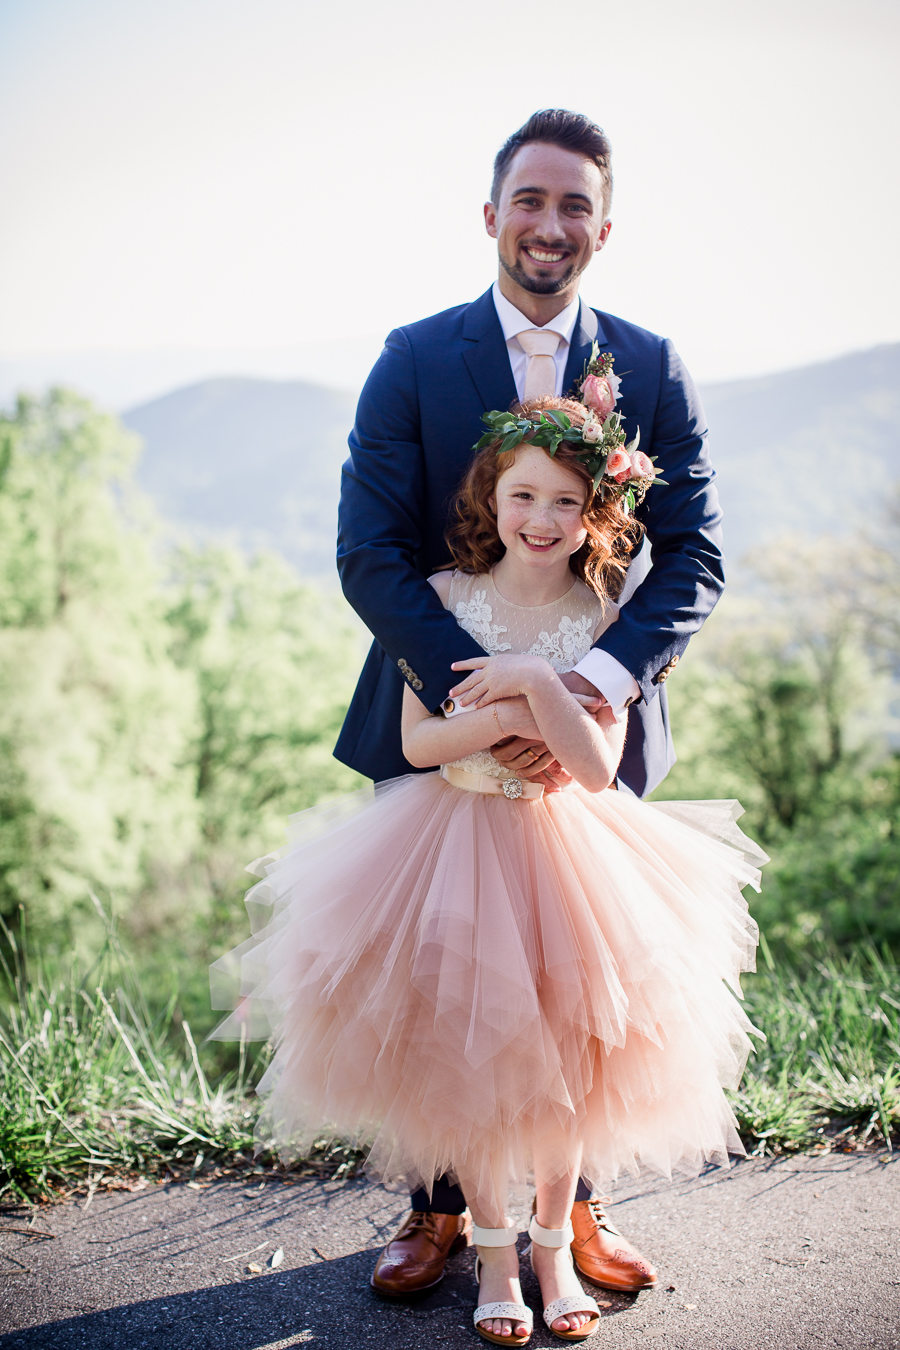 Groom and Flower Girl at this North Carolina Elopement by Knoxville Wedding Photographer, Amanda May Photos.